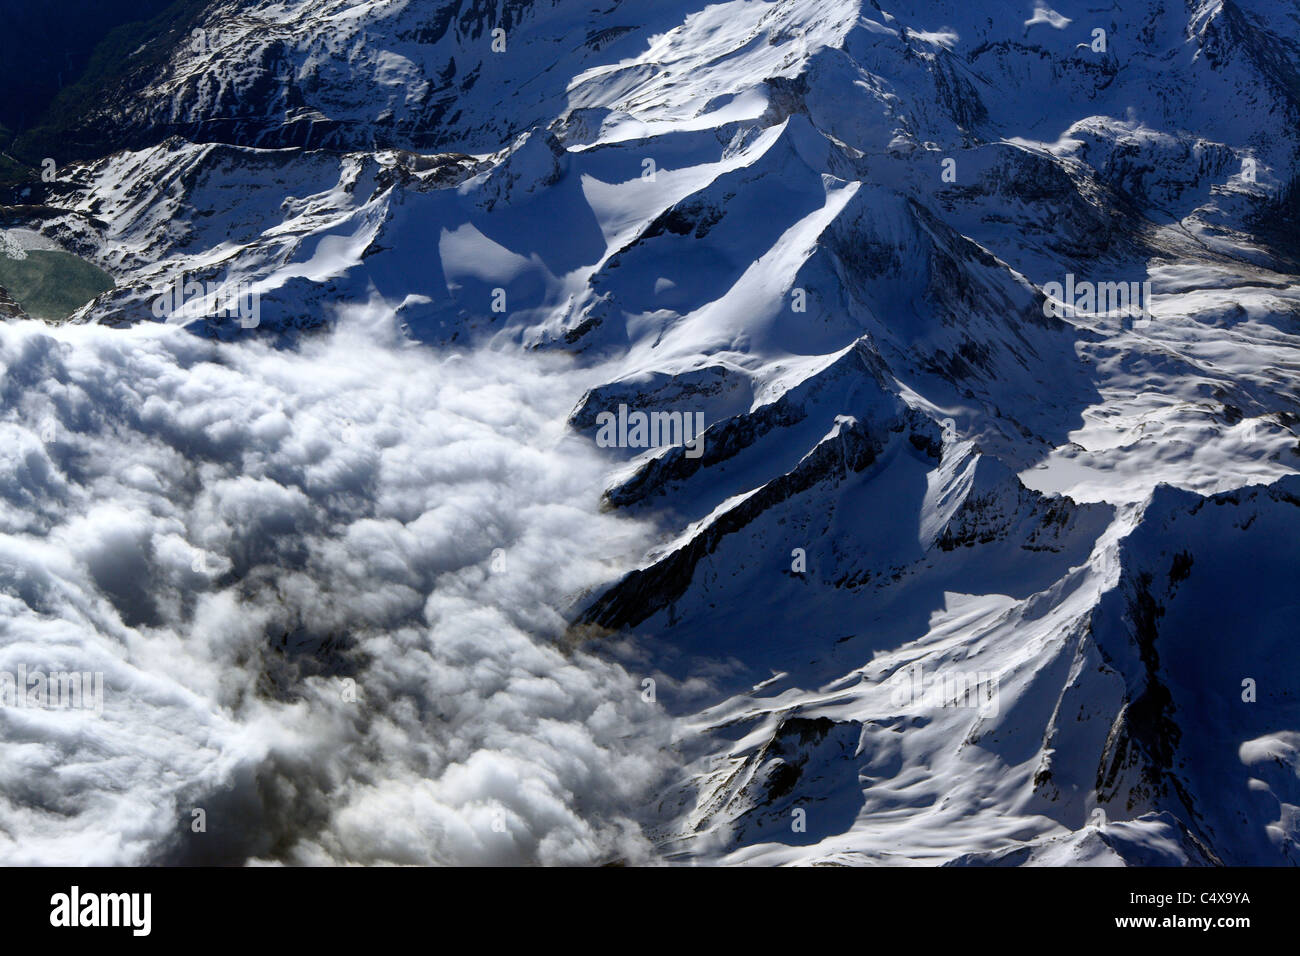 View of Alps mountains from air plane Stock Photo